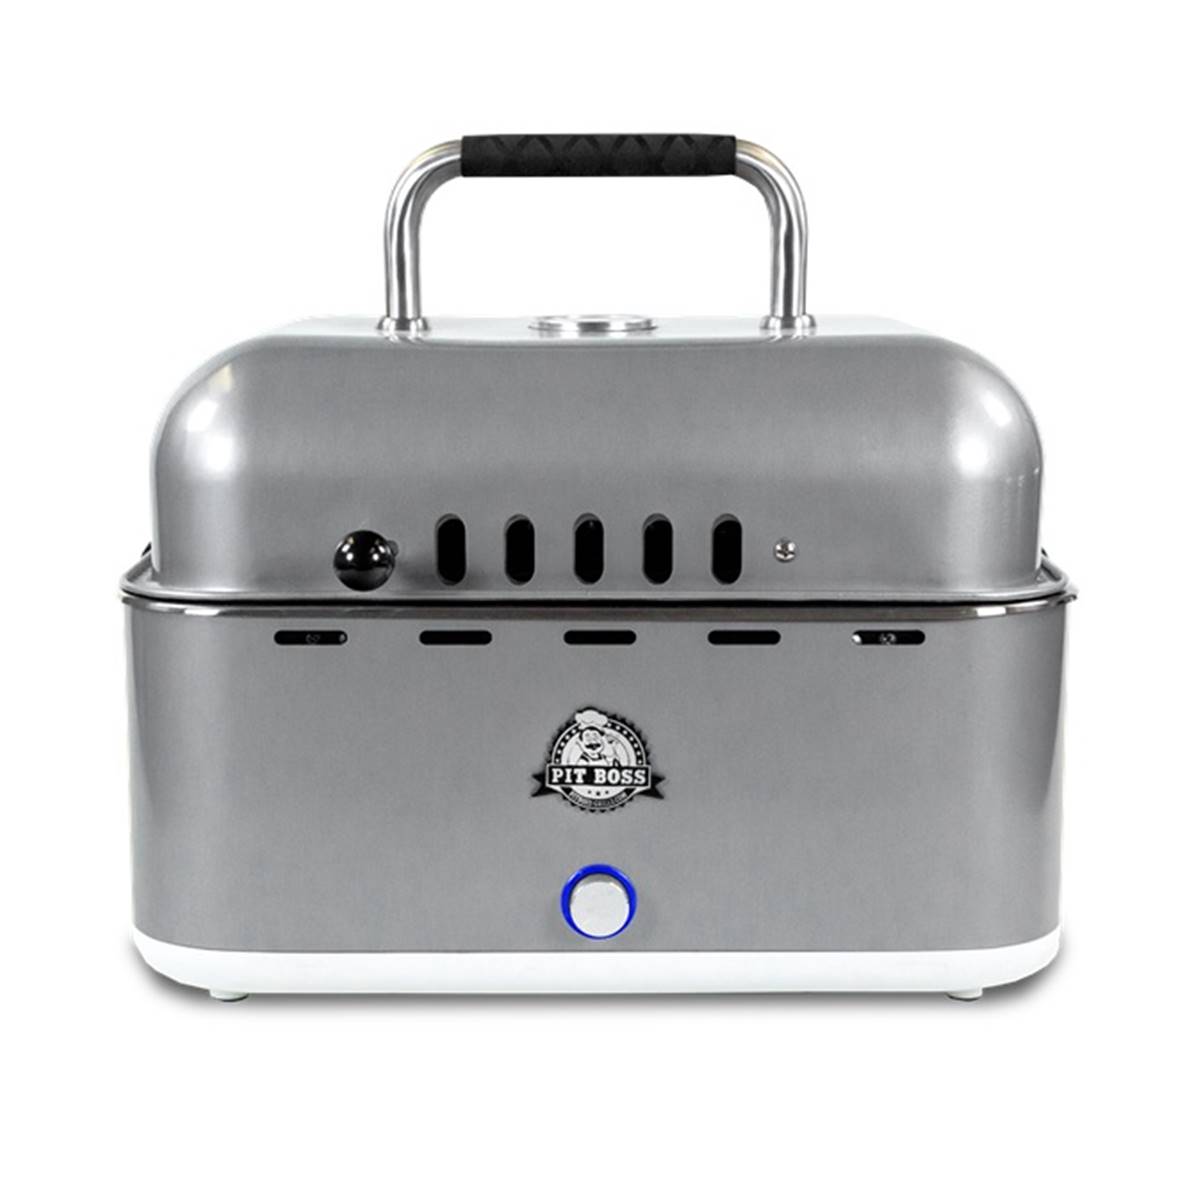 Barbecue Portable Charbon Pit Boss